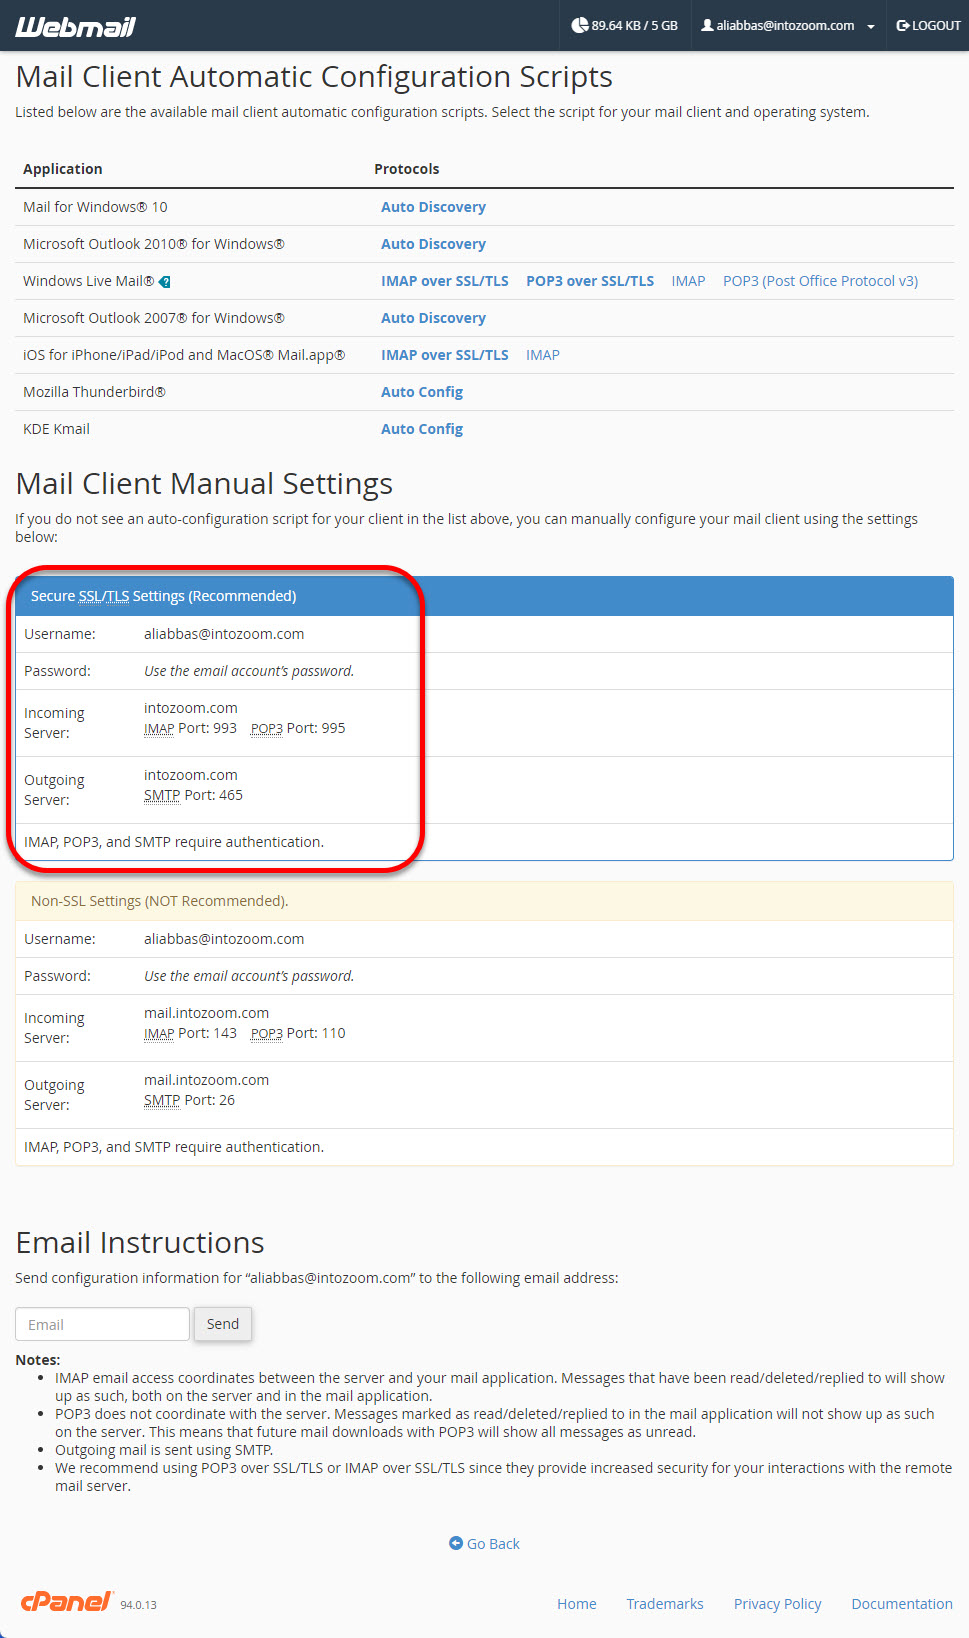 Mail Client Manual Settings